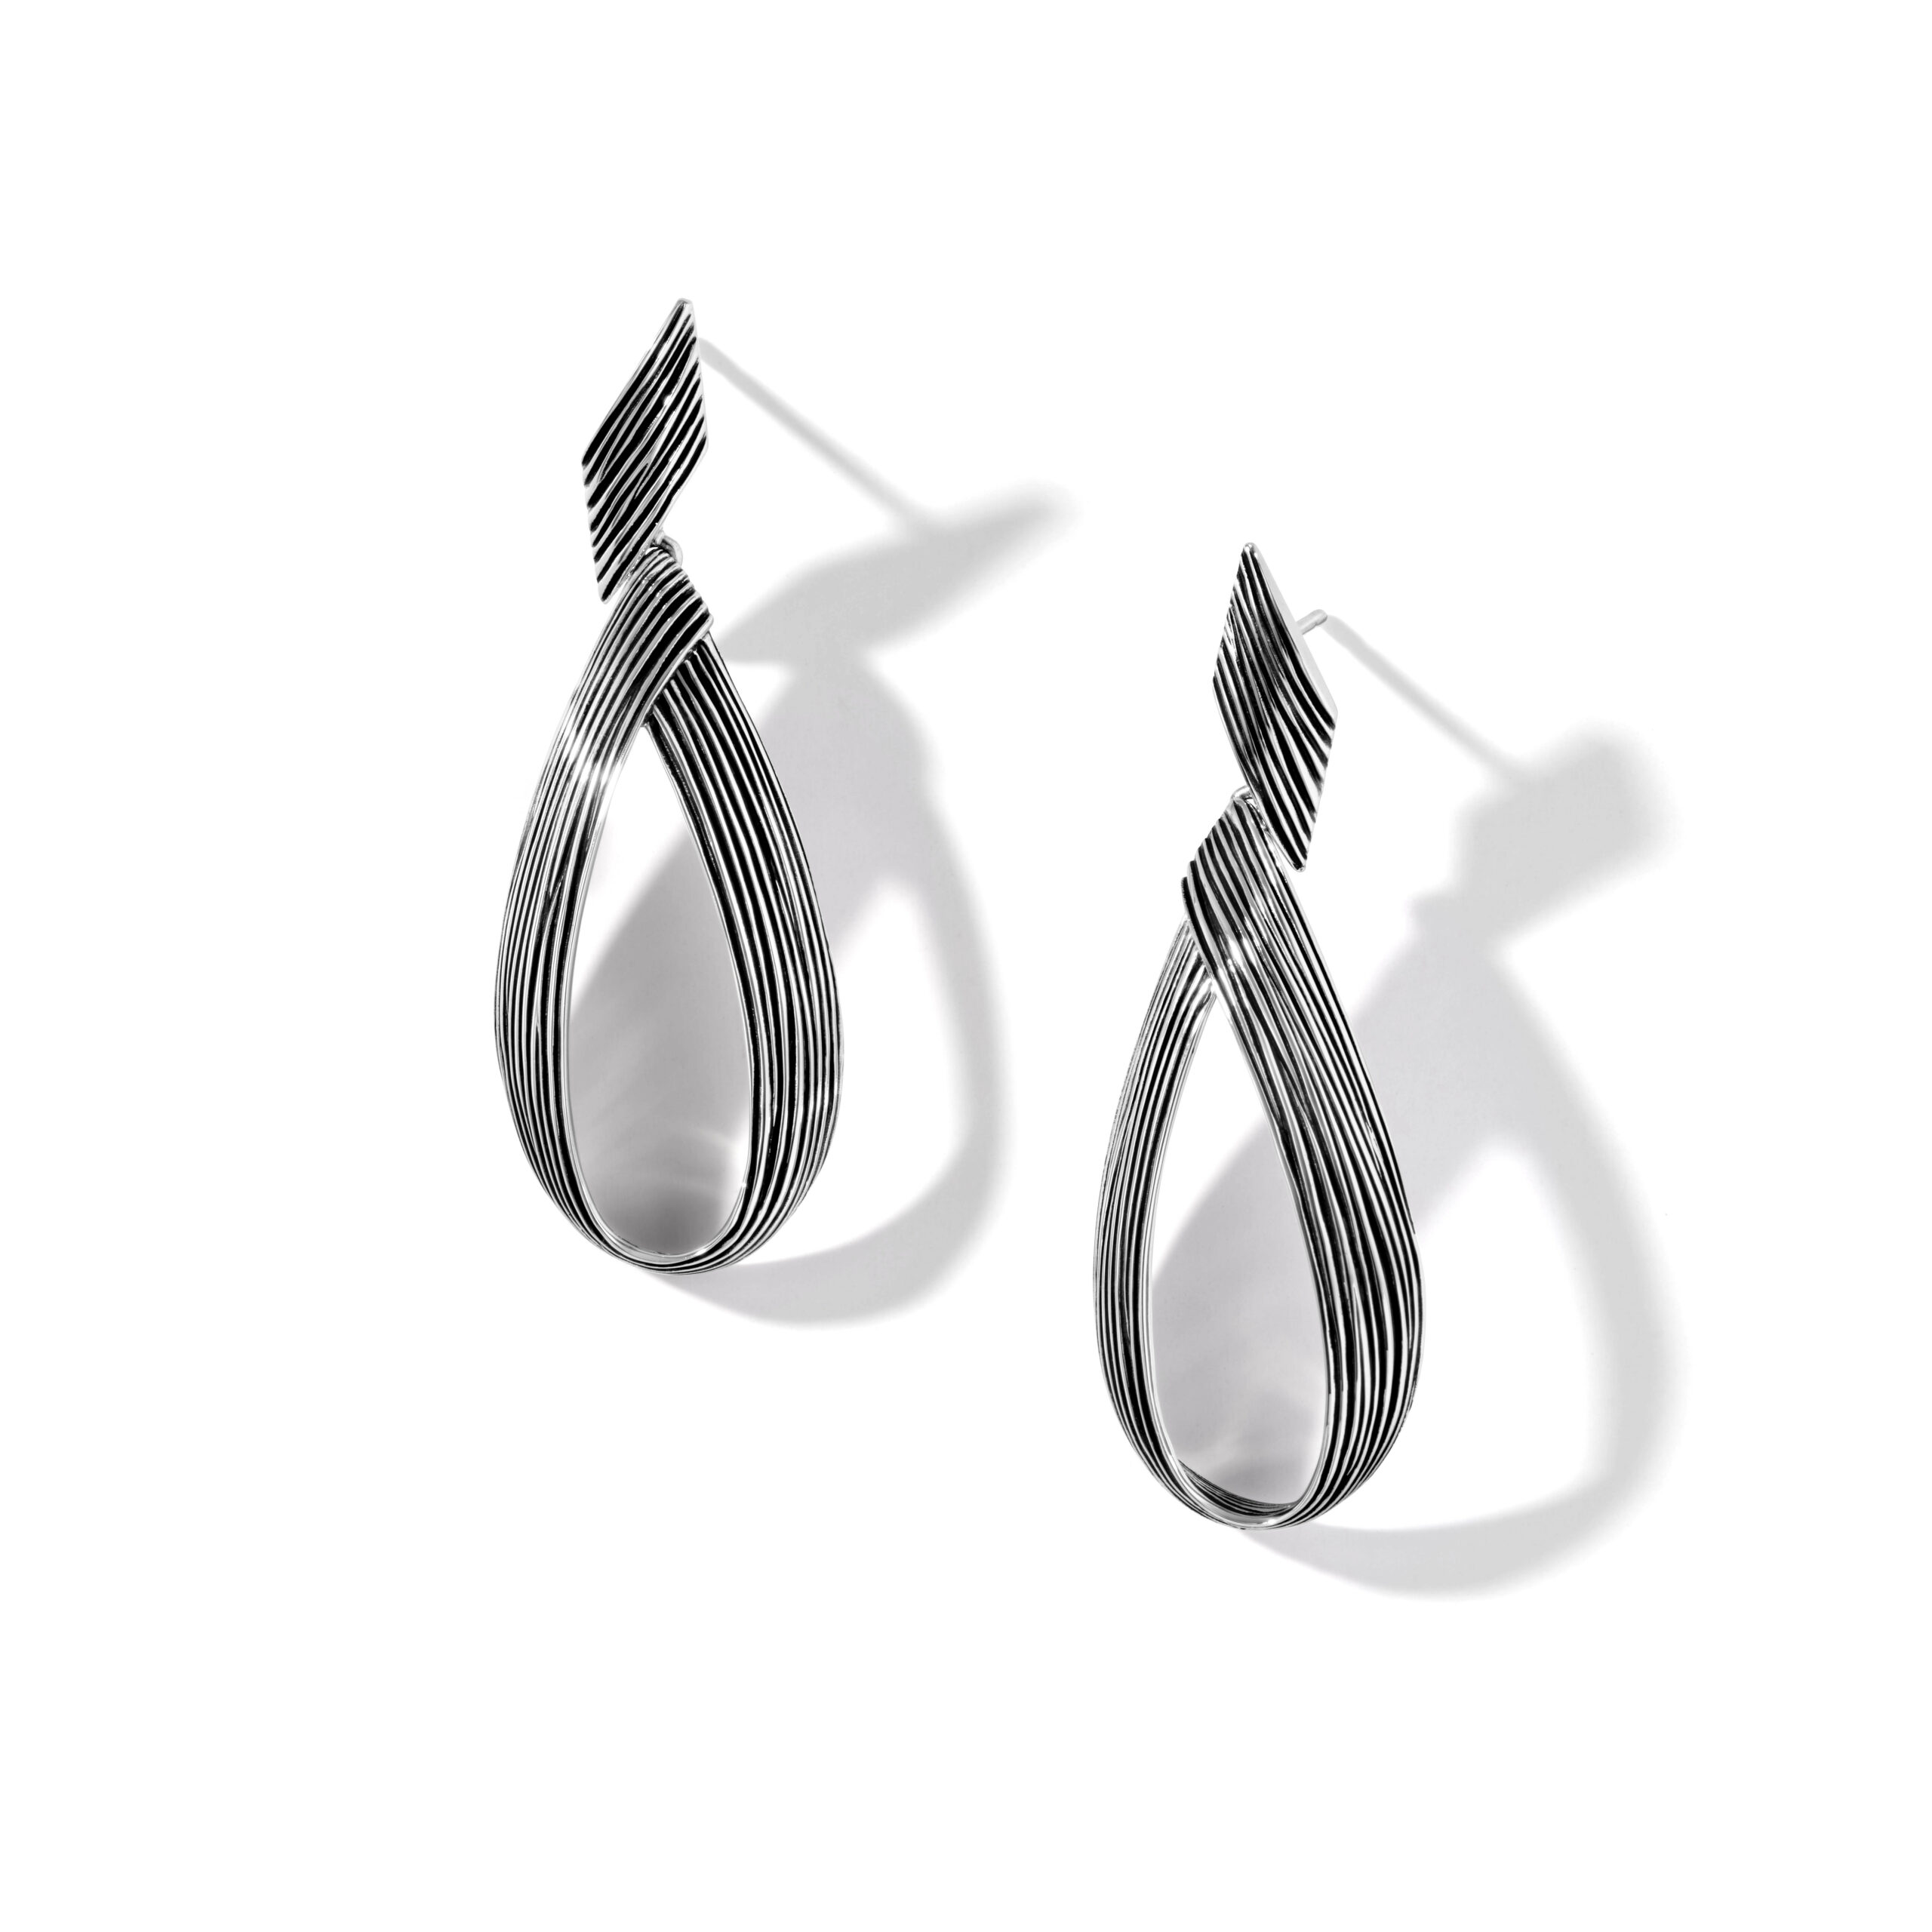 This pair of earrings by John Hardy is crafted from sterling silver and features a twisted loop.